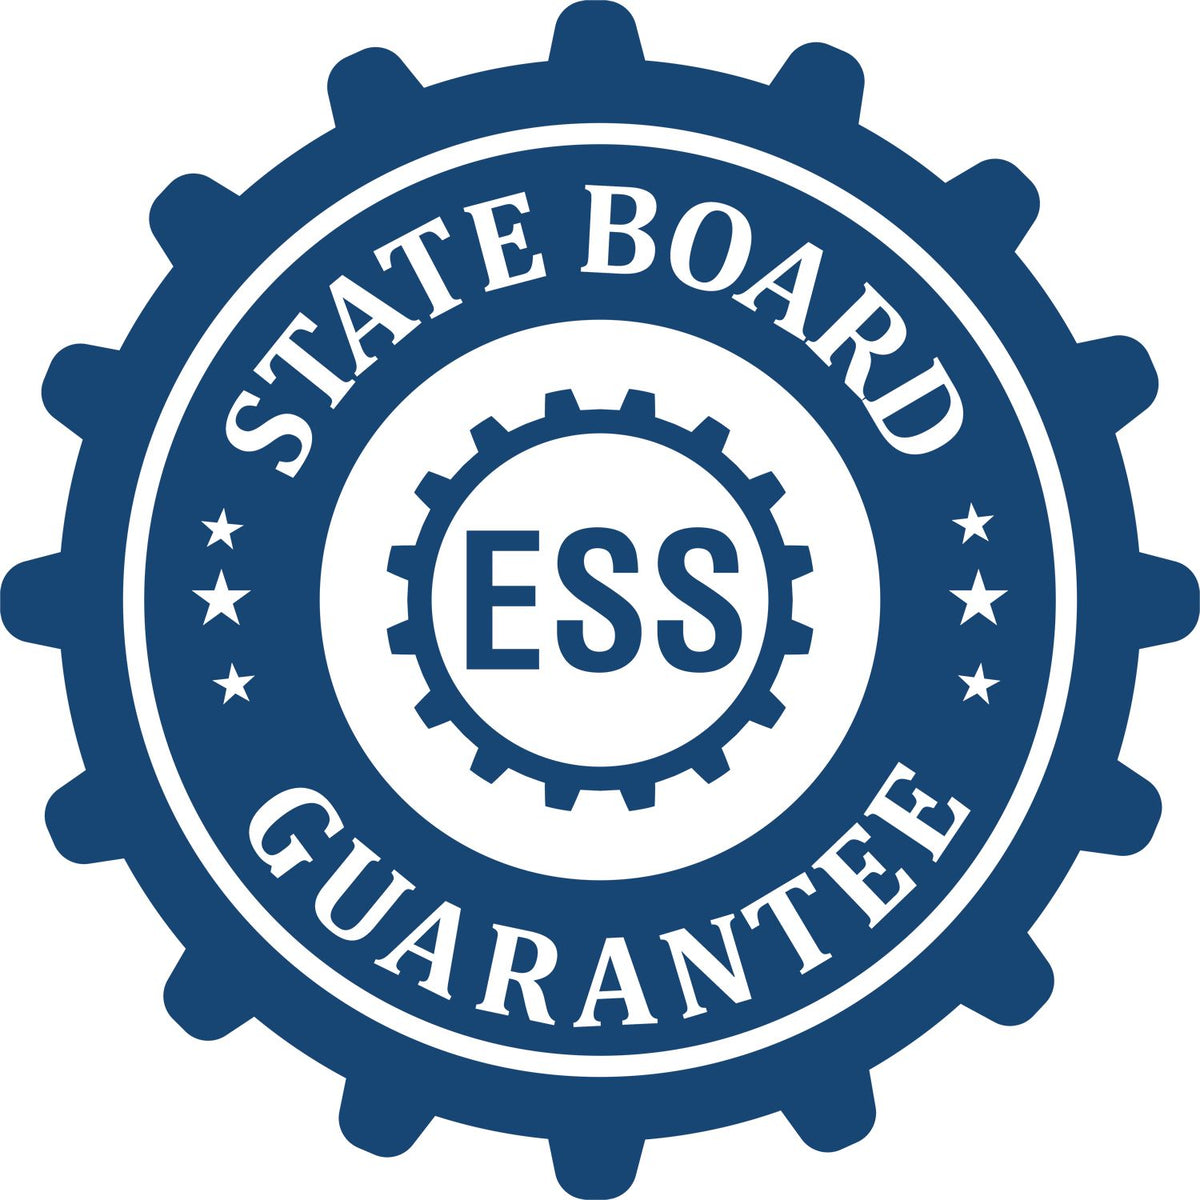 An emblem in a gear shape illustrating a state board guarantee for the Oklahoma Landscape Architectural Seal Stamp product.